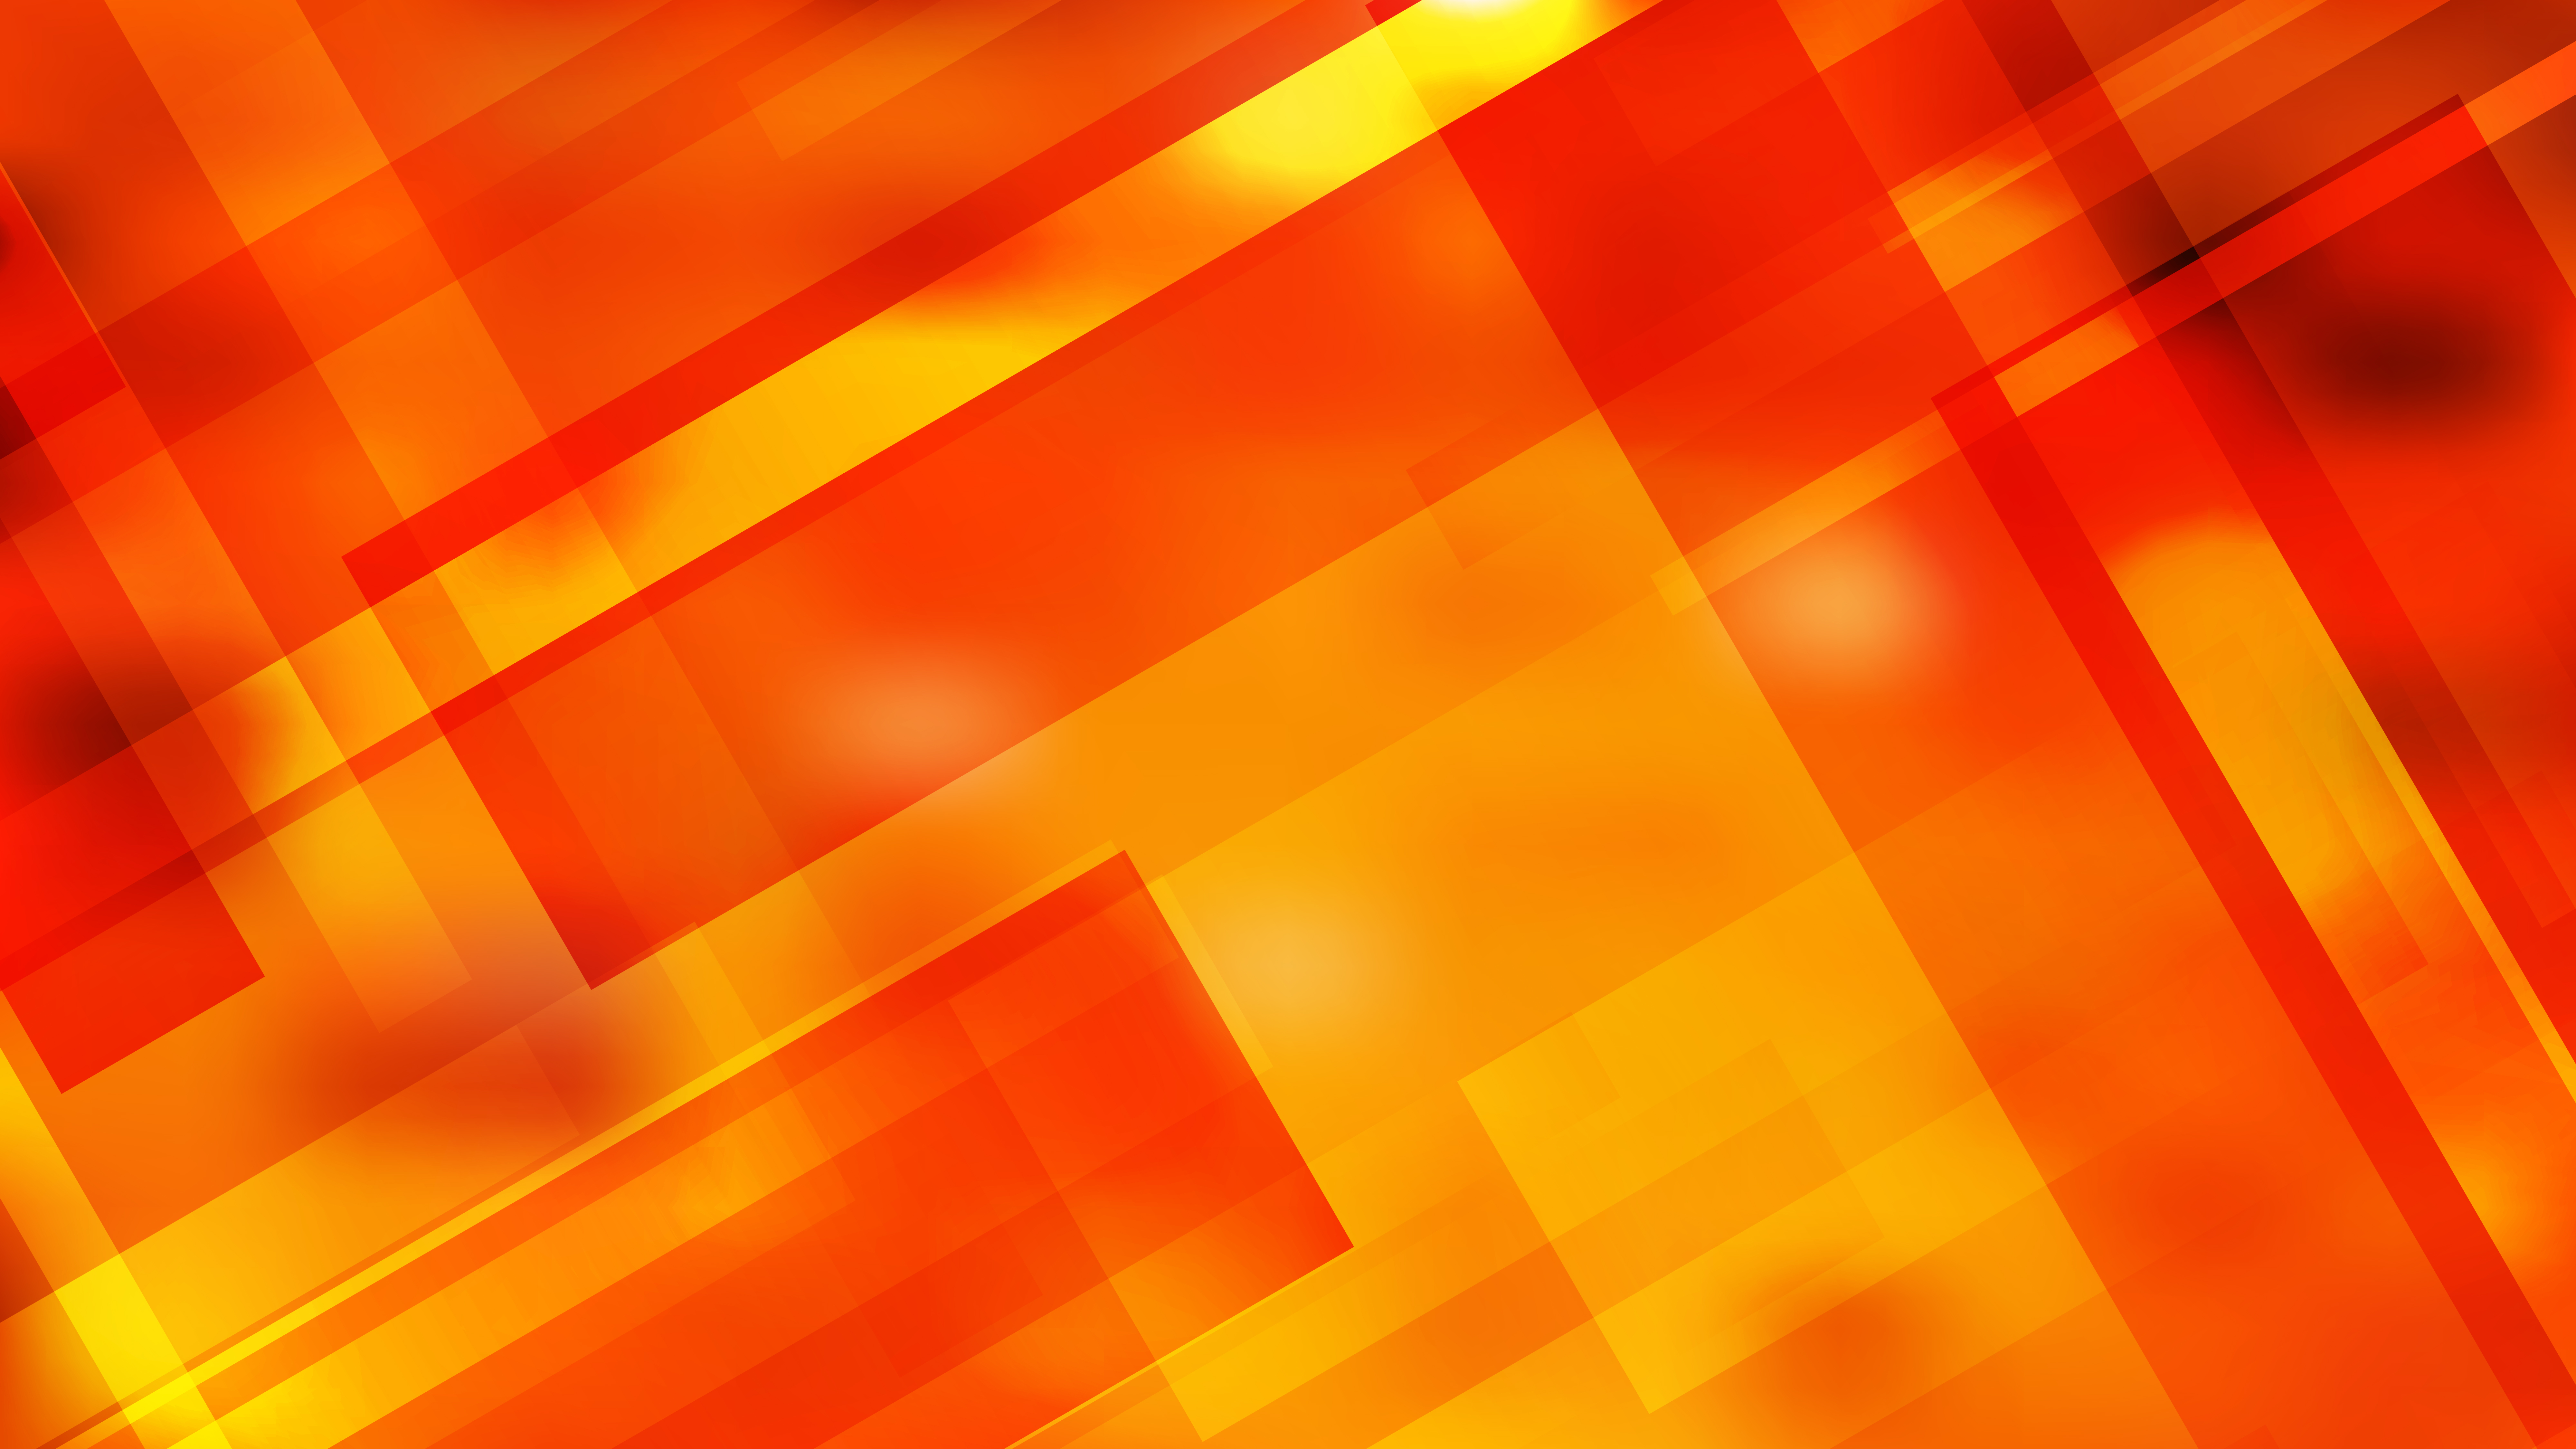 Free Red and Yellow Geometric Abstract Background Vector Image